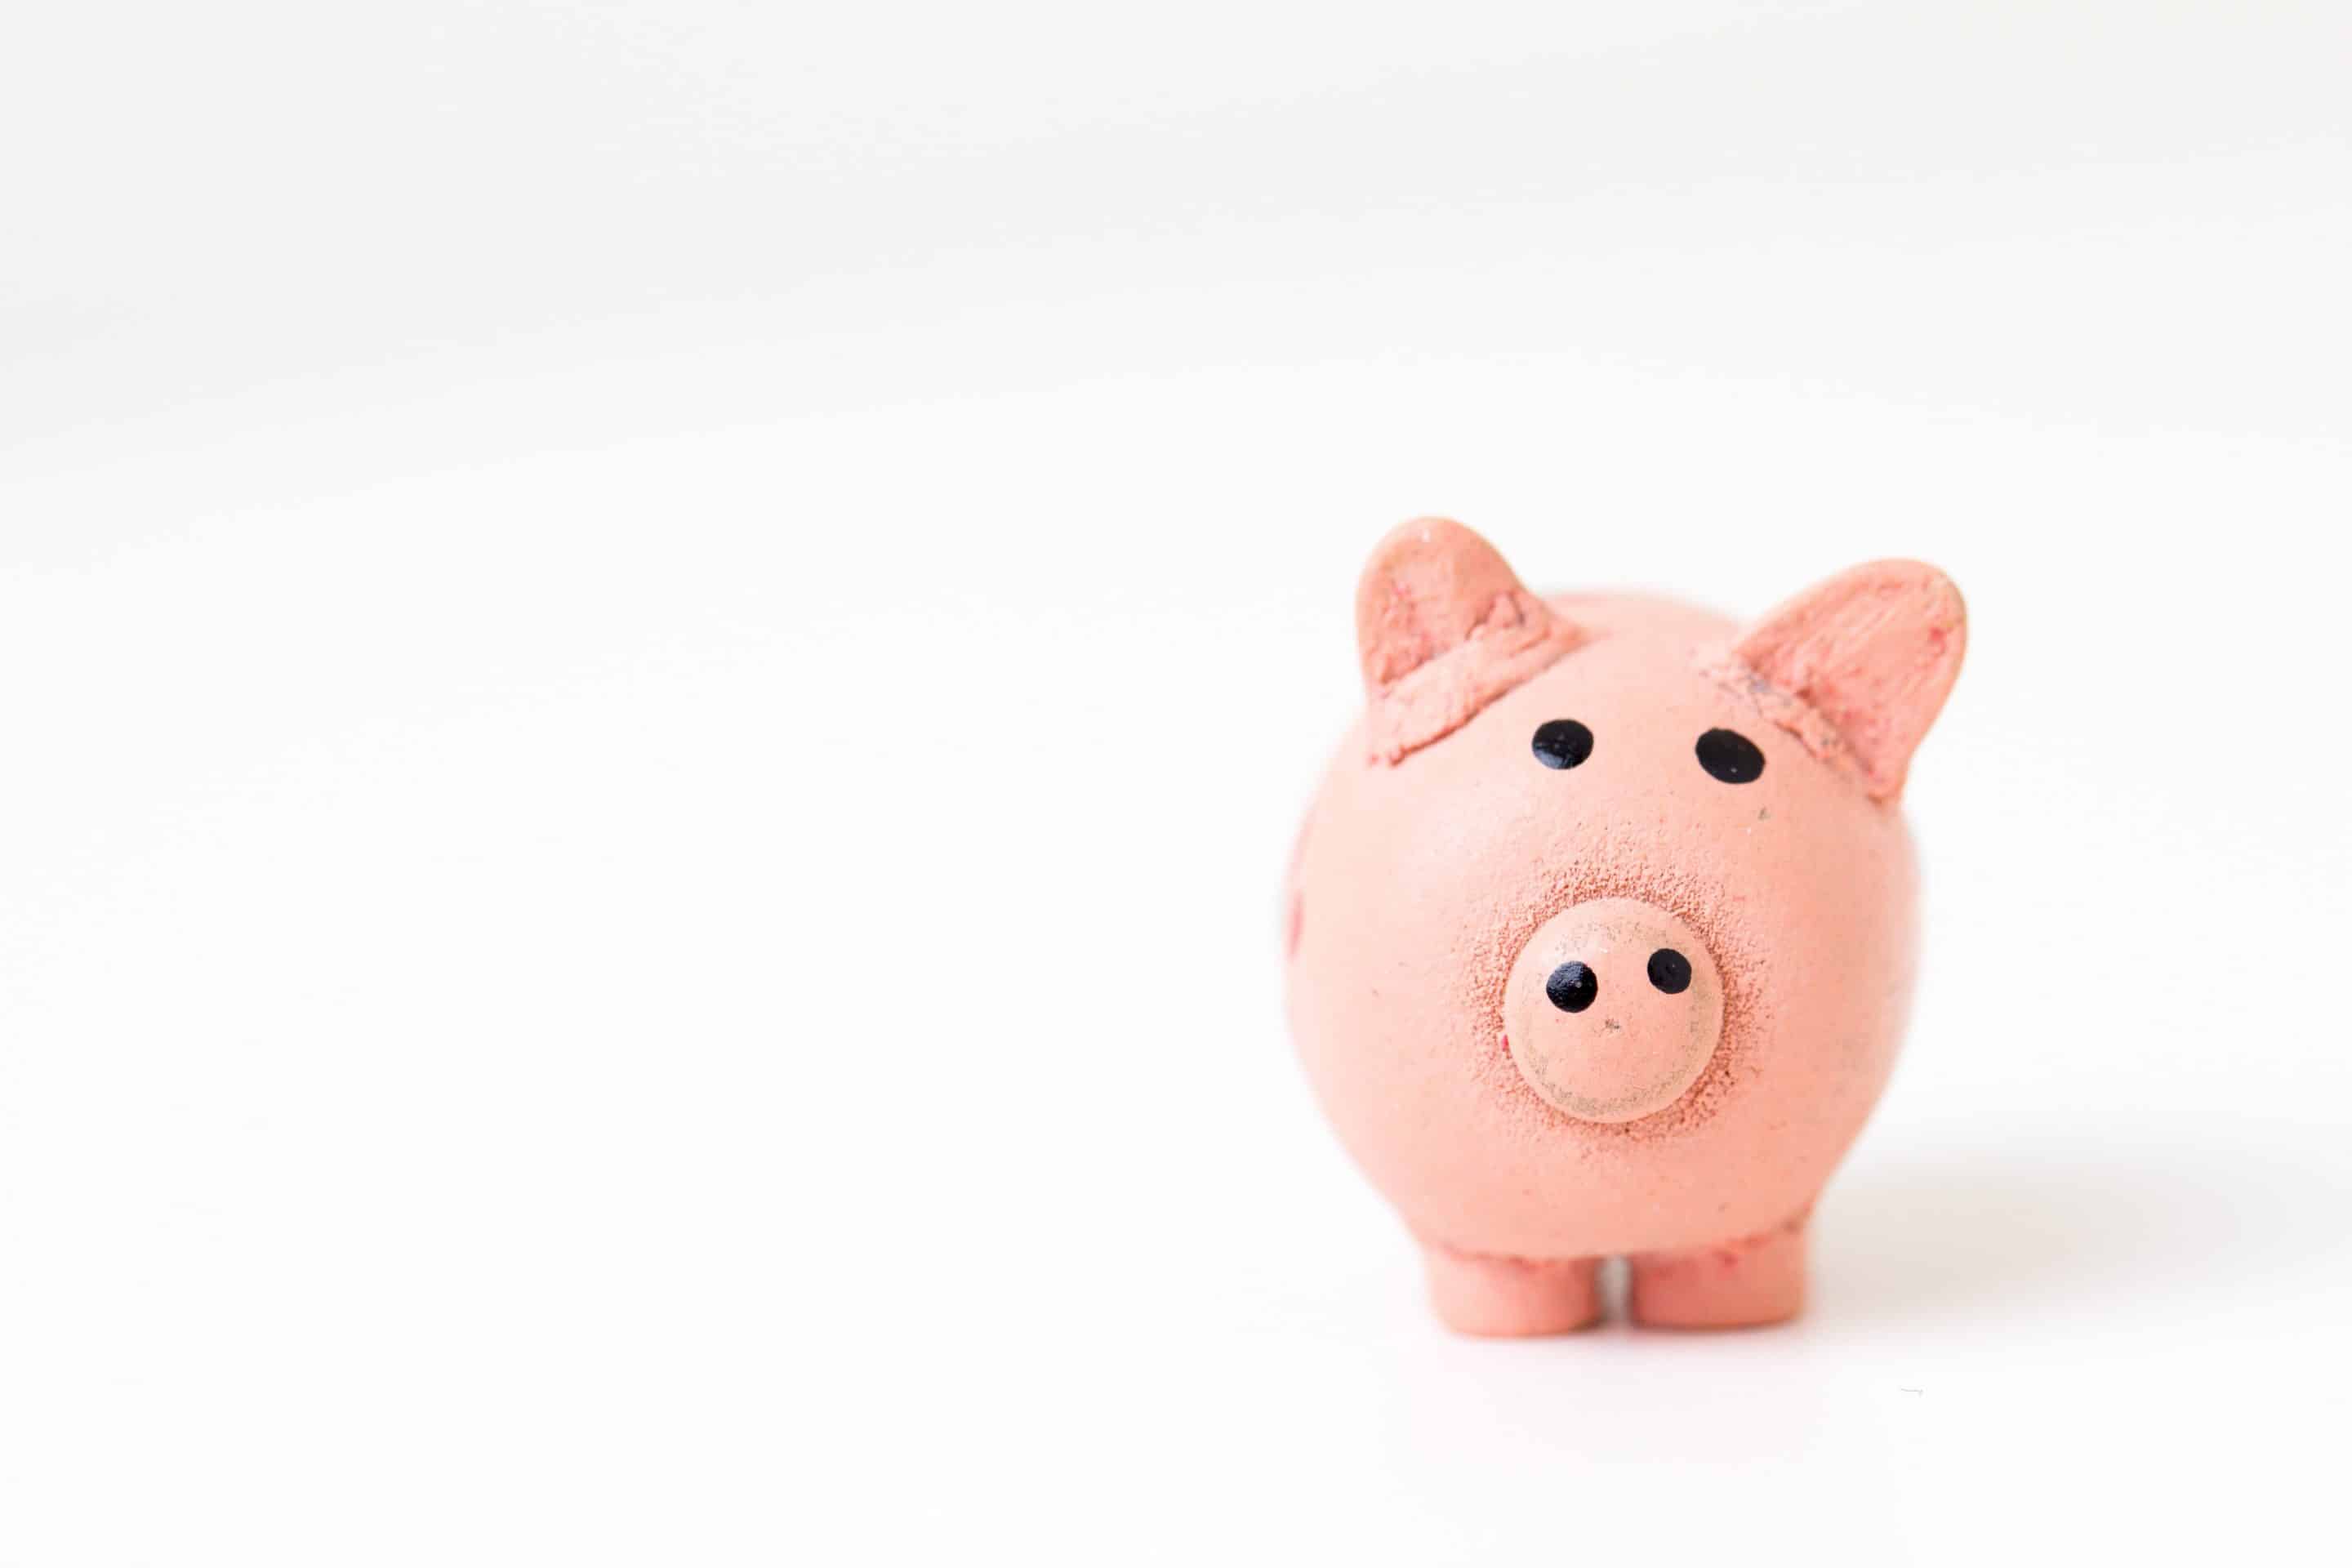 can-we-talk-about-money-really-quick-pink-pig-moneybox